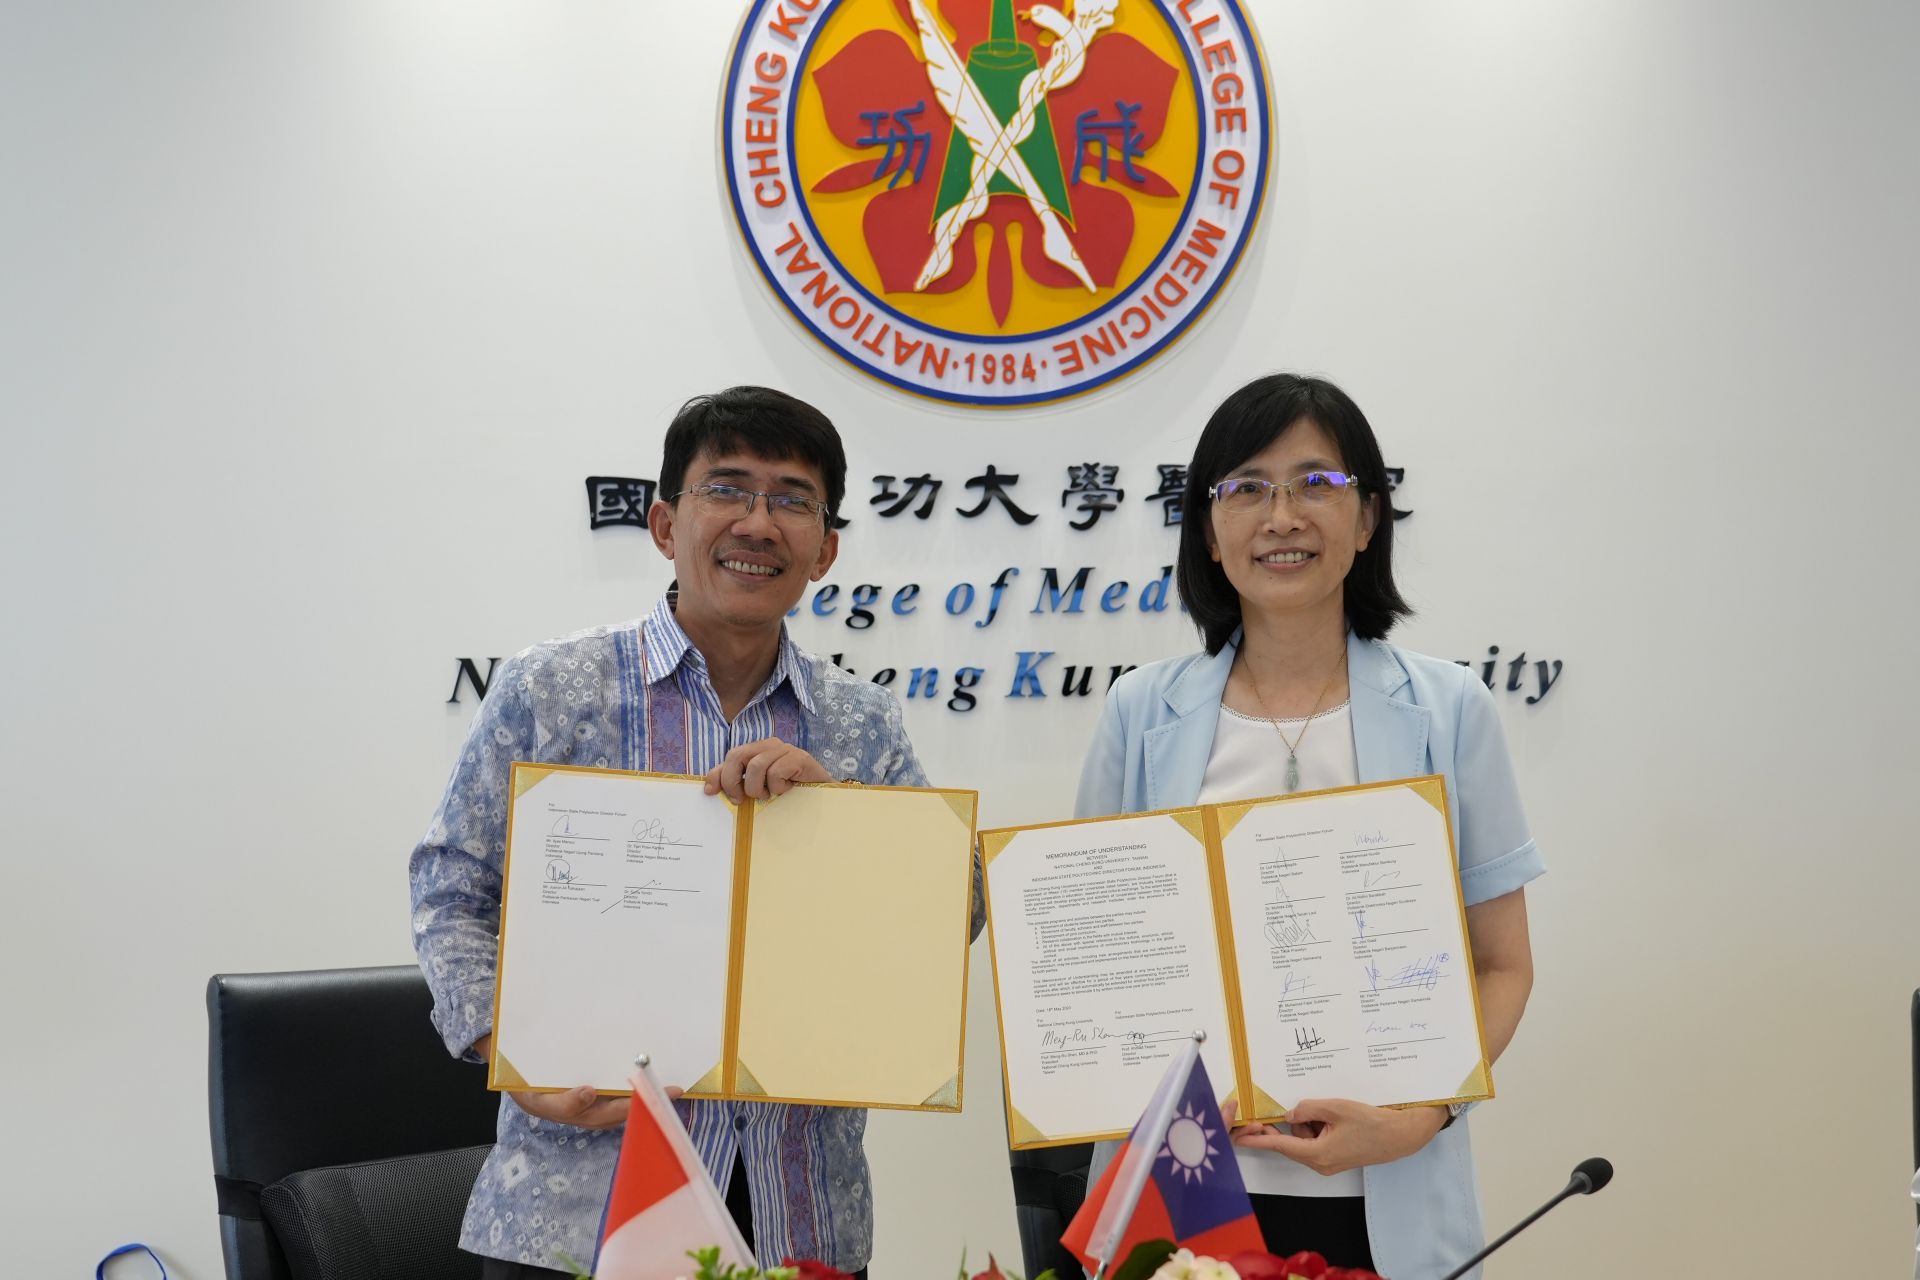 NCKU-EDPNI sign MOU to promote technological and vocational education in Indonesia